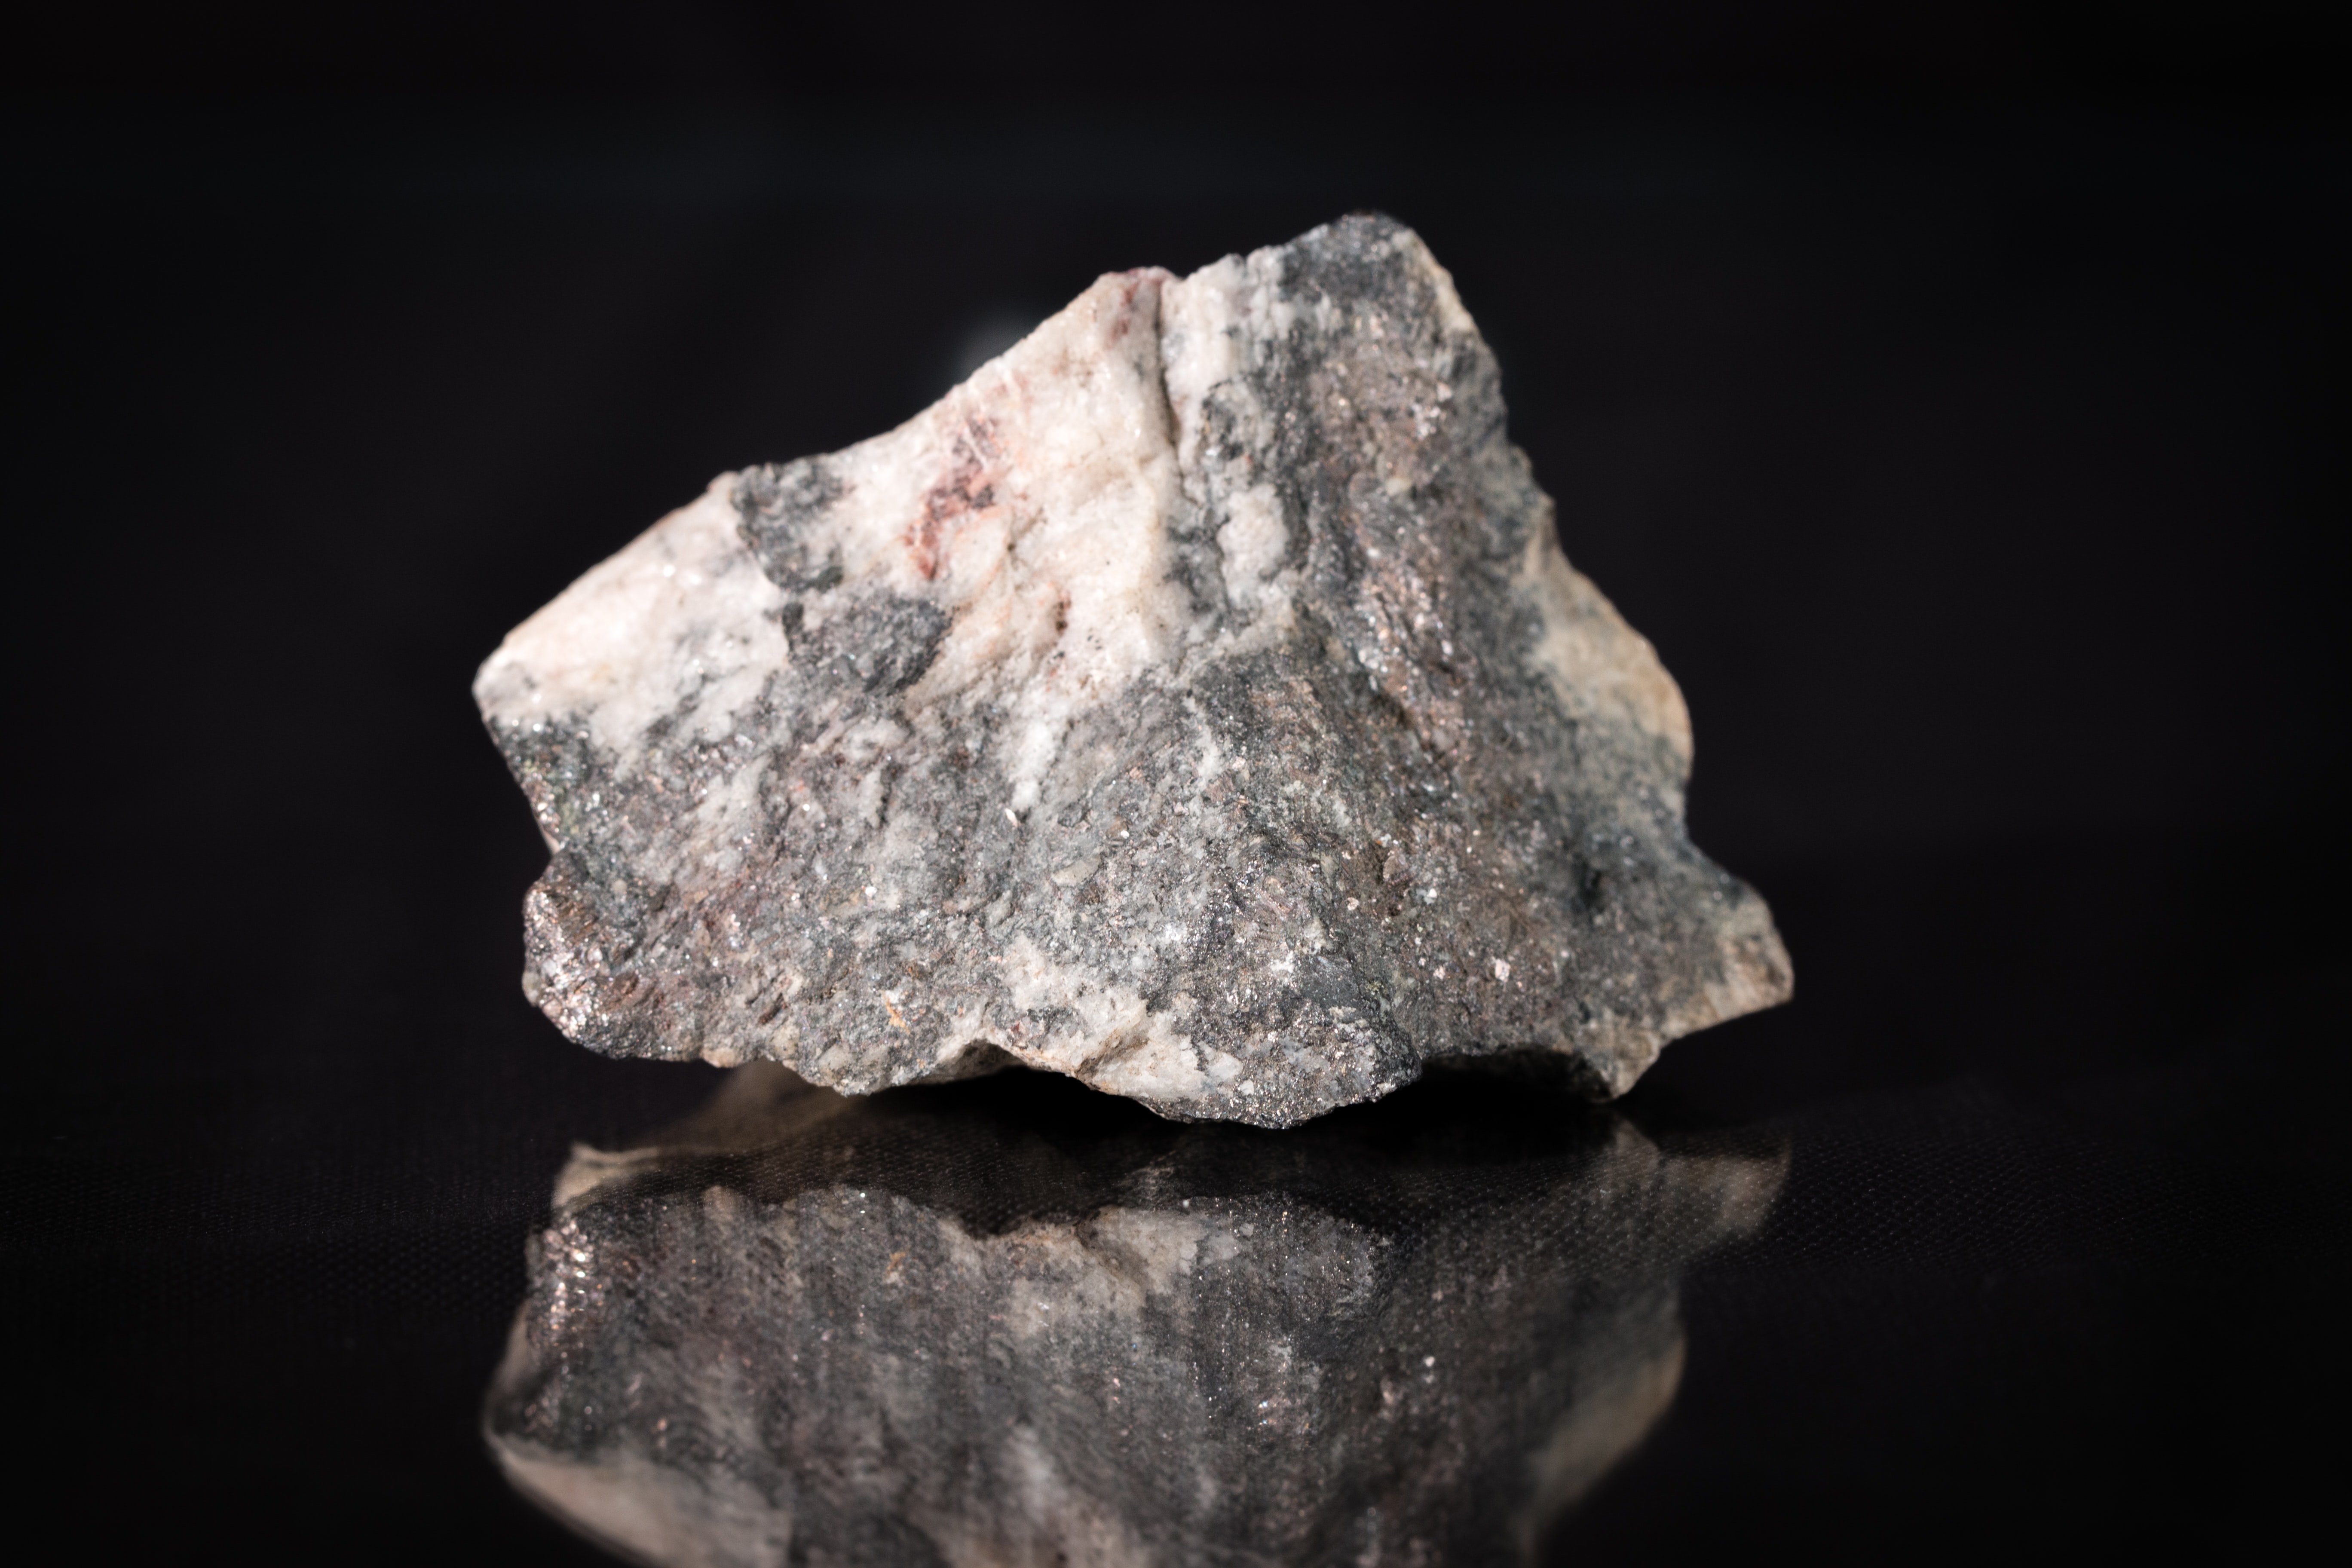 A rock against a black background